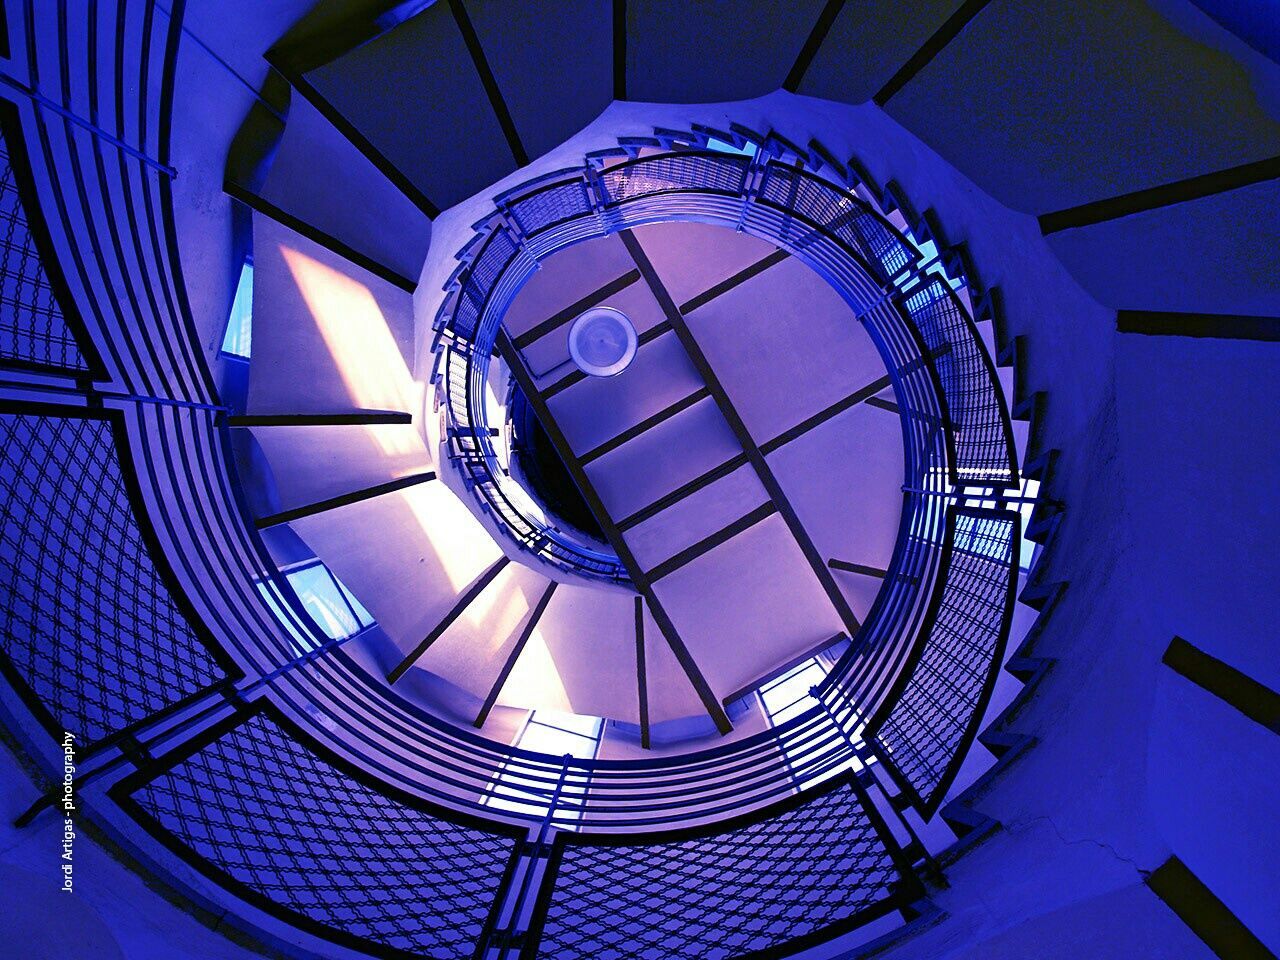 indoors, low angle view, built structure, ceiling, architecture, pattern, spiral staircase, circle, directly below, design, staircase, blue, spiral, steps and staircases, steps, geometric shape, skylight, railing, modern, architectural feature